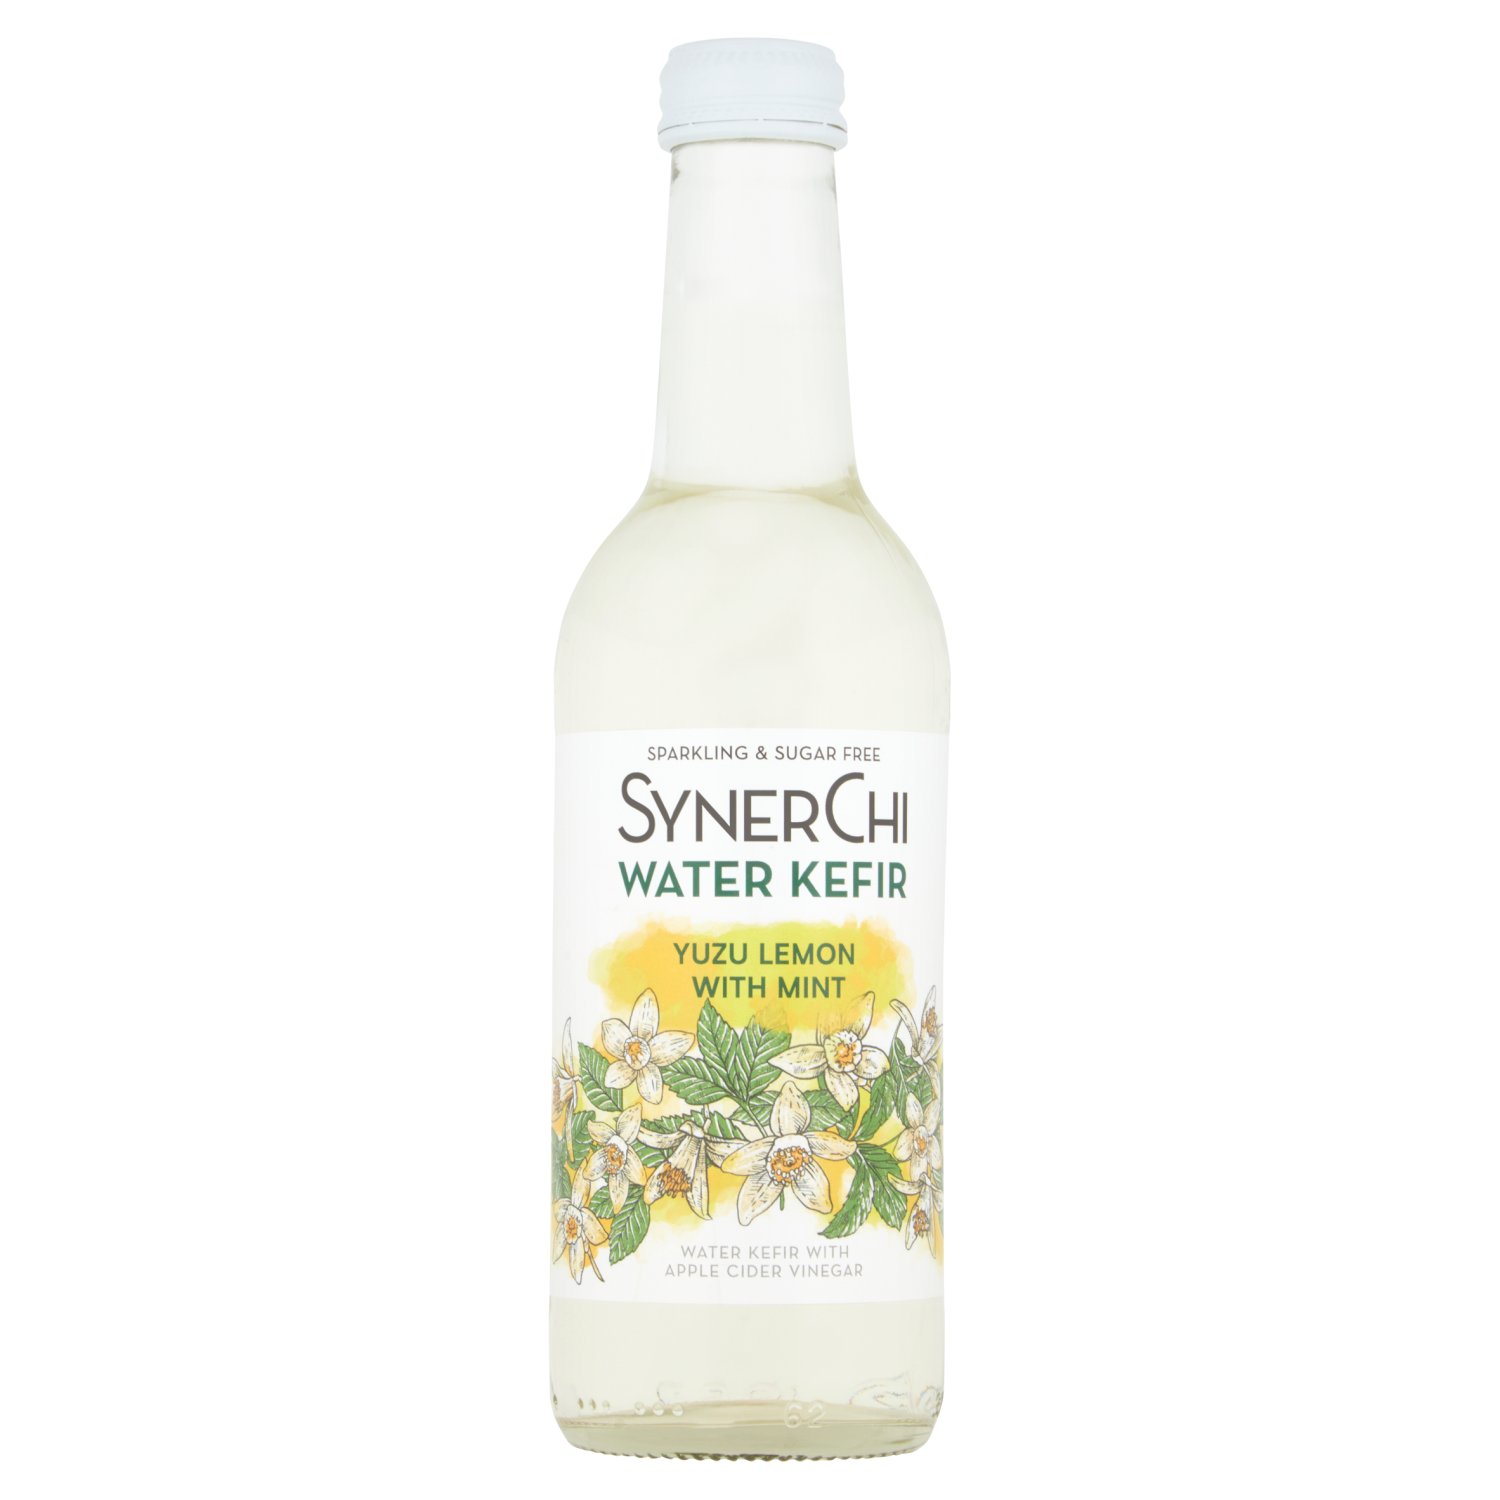 Fermented in Co. Donegal
Hand crafted in small batch brews and blended with apple cider vinegar.
Our delicious sugar free water kefir refreshment is sweetened from natural sources.